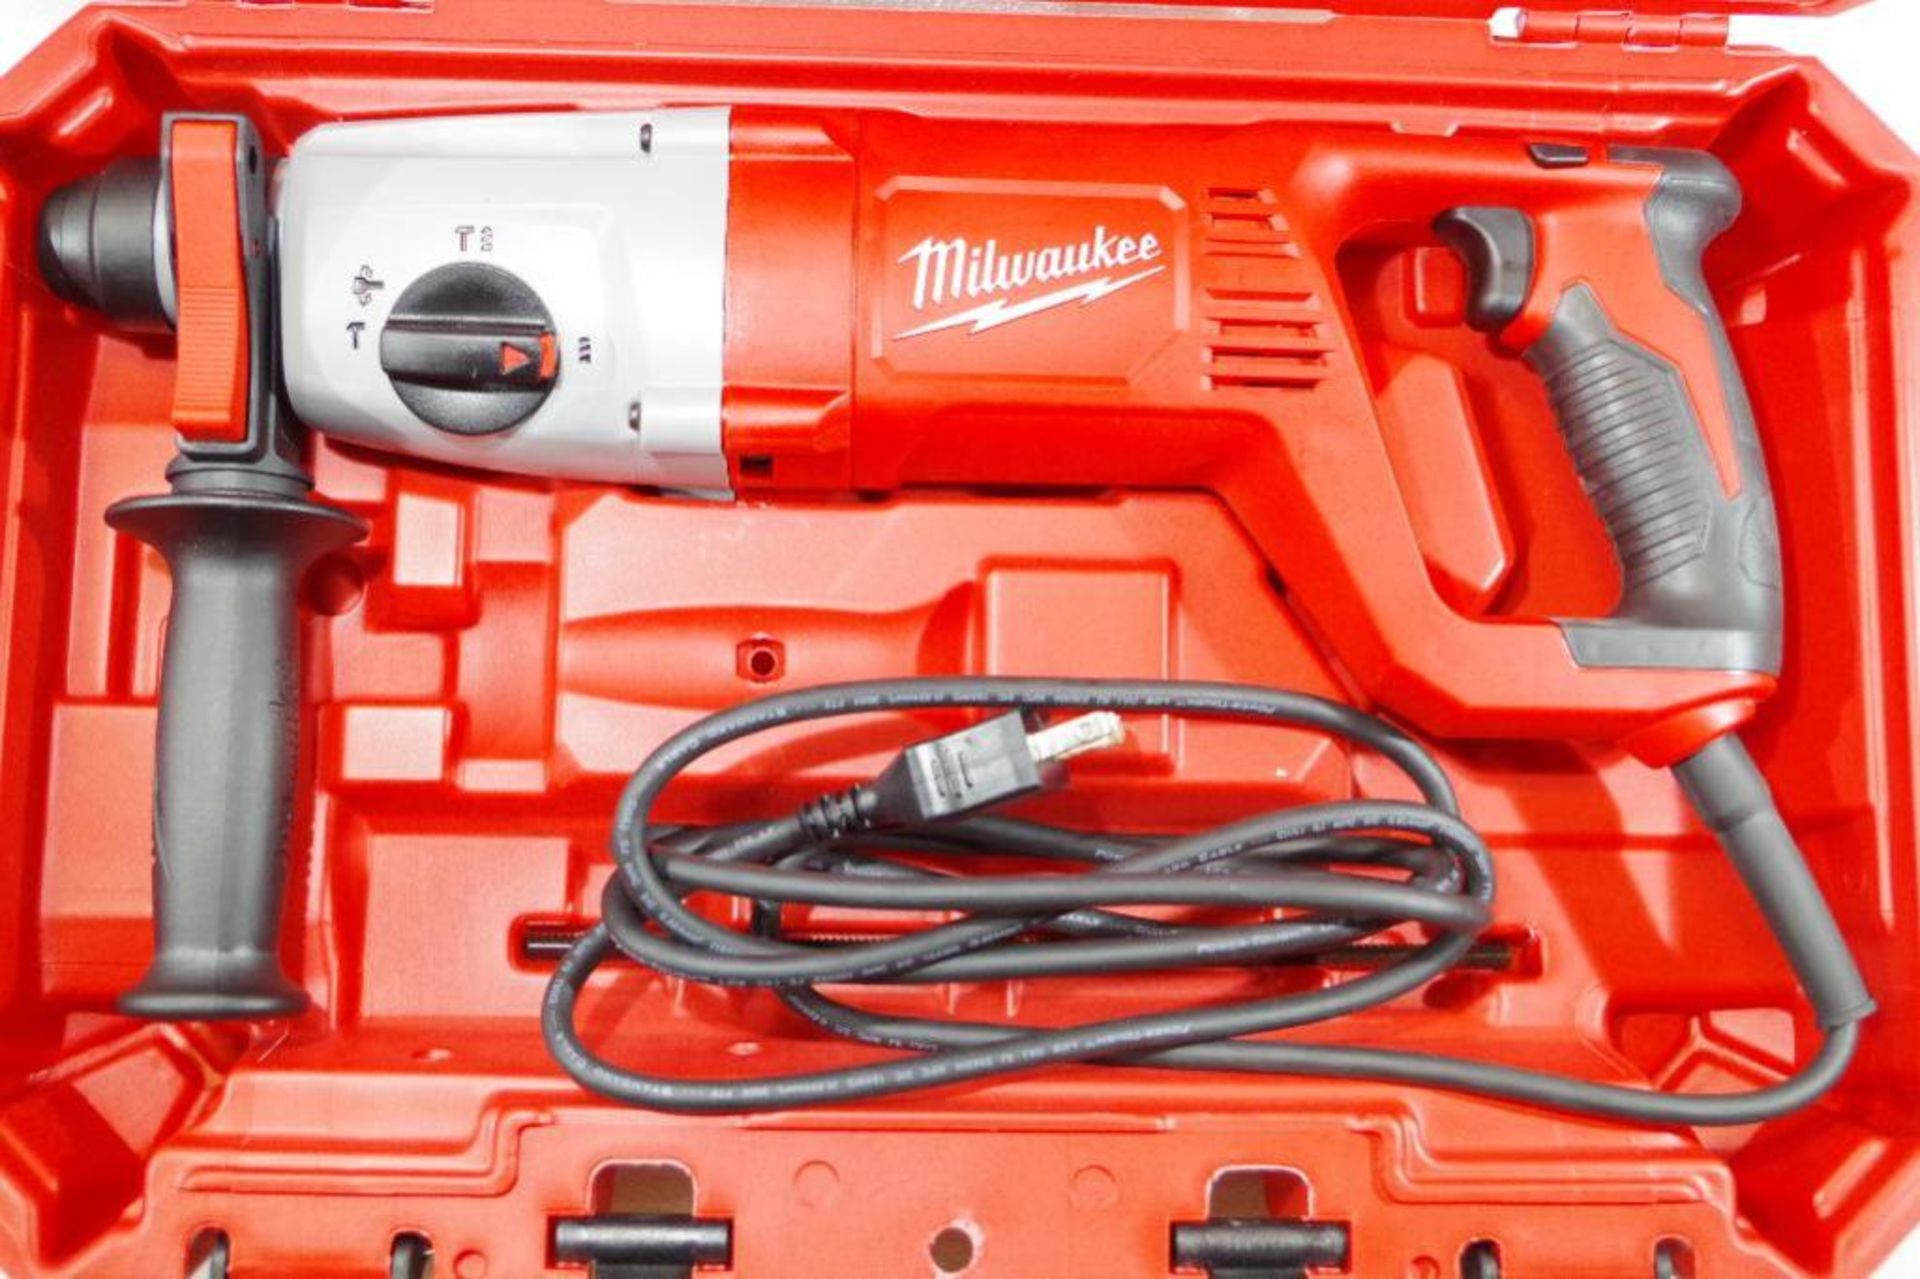 MILWAUKEE 1" SDS Plus Rotary Hammer M/N 5262-21 w/ Tool Grip & Case - Image 4 of 4